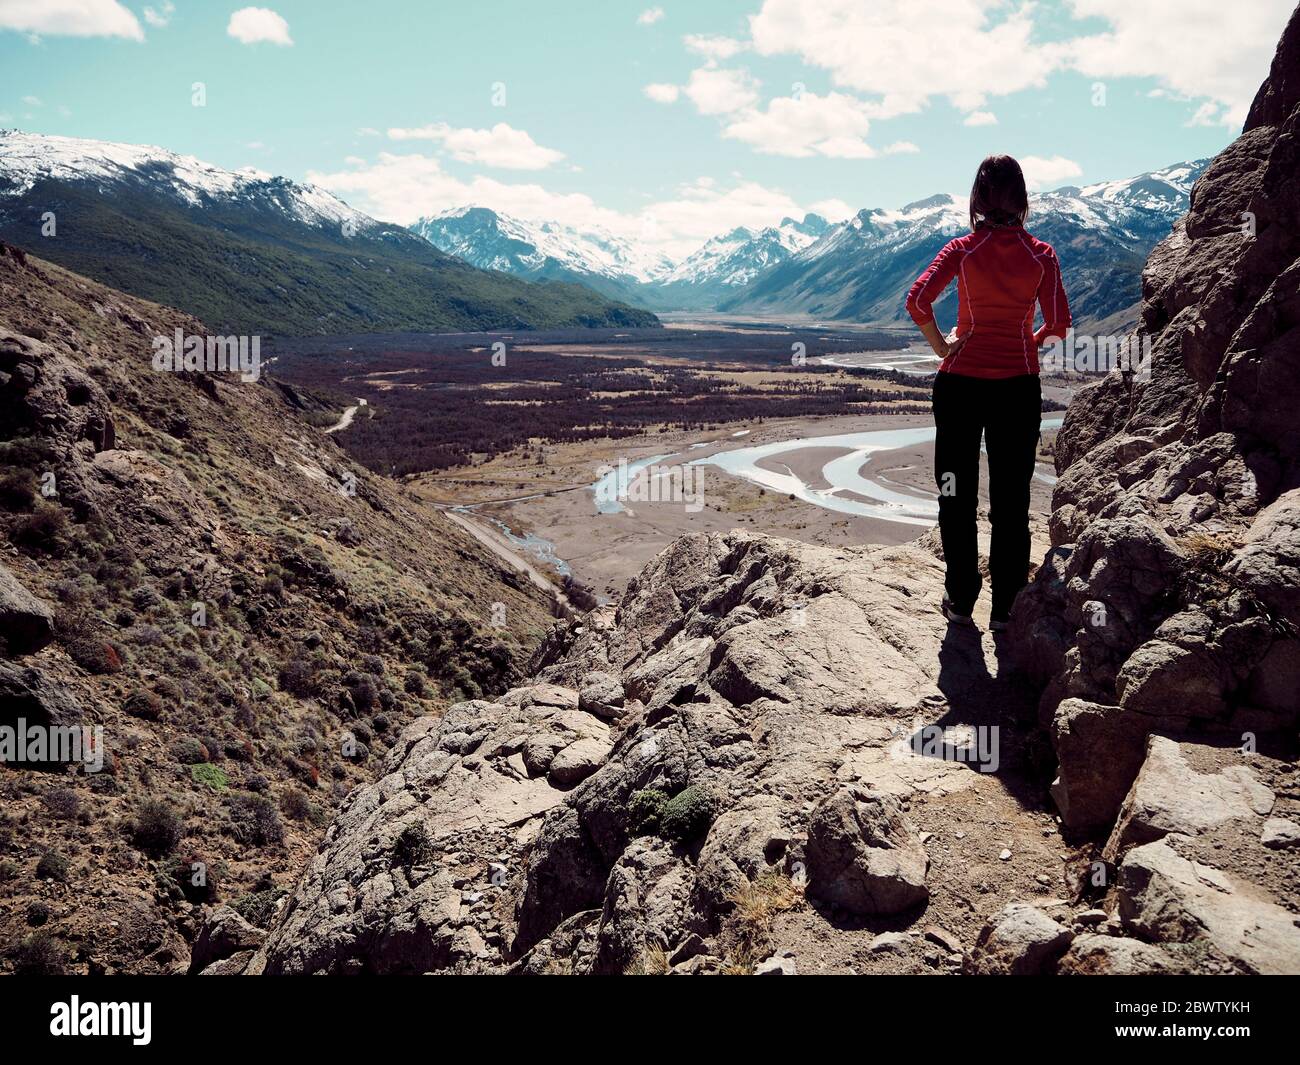 Rear view of Woman on a rock admiring the mountain views, El Chalten, Argentina Stock Photo